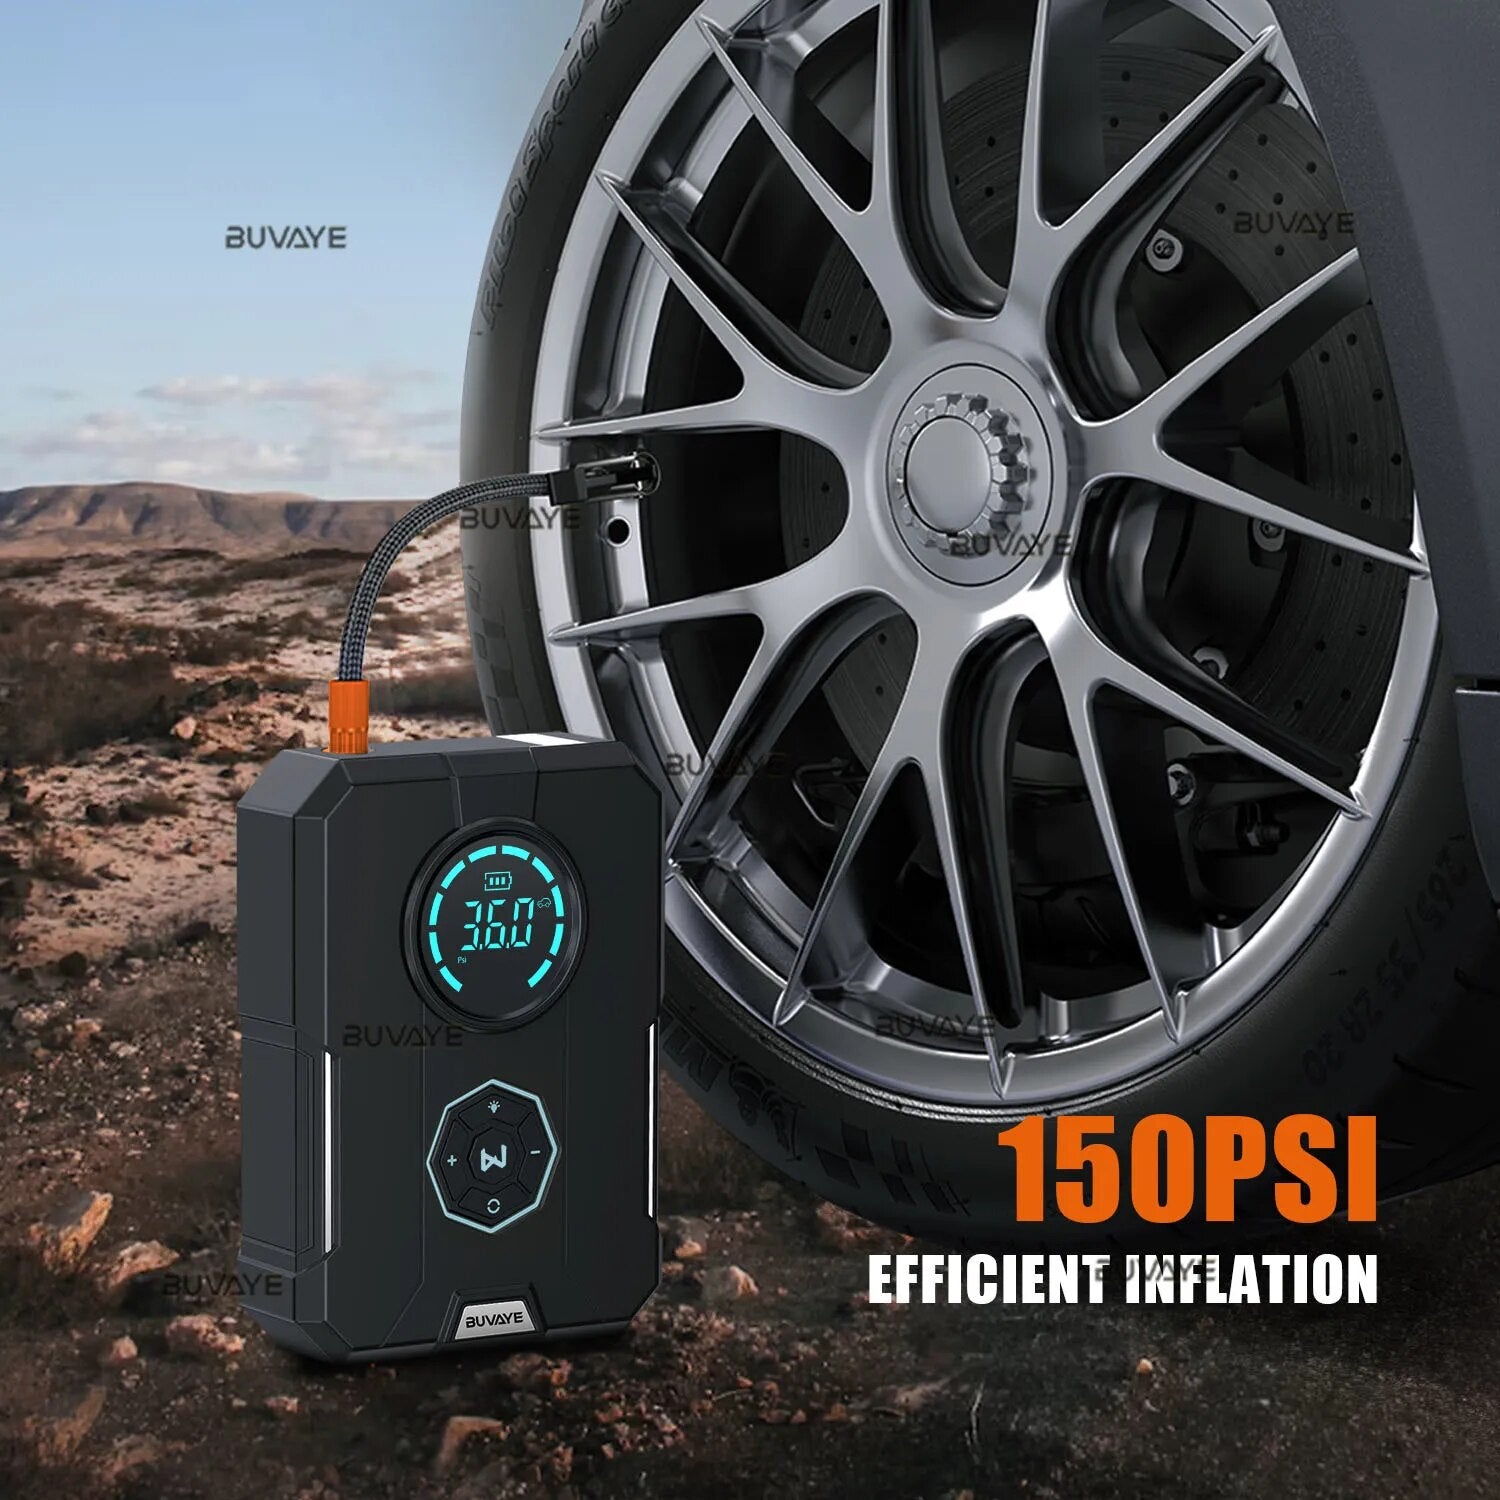 BUVAYE 6 In 1 Car Jump Starter Air Pump Portable Air Compressor Power Bank Cars Battery Starters Starting Auto Tyre Inflator